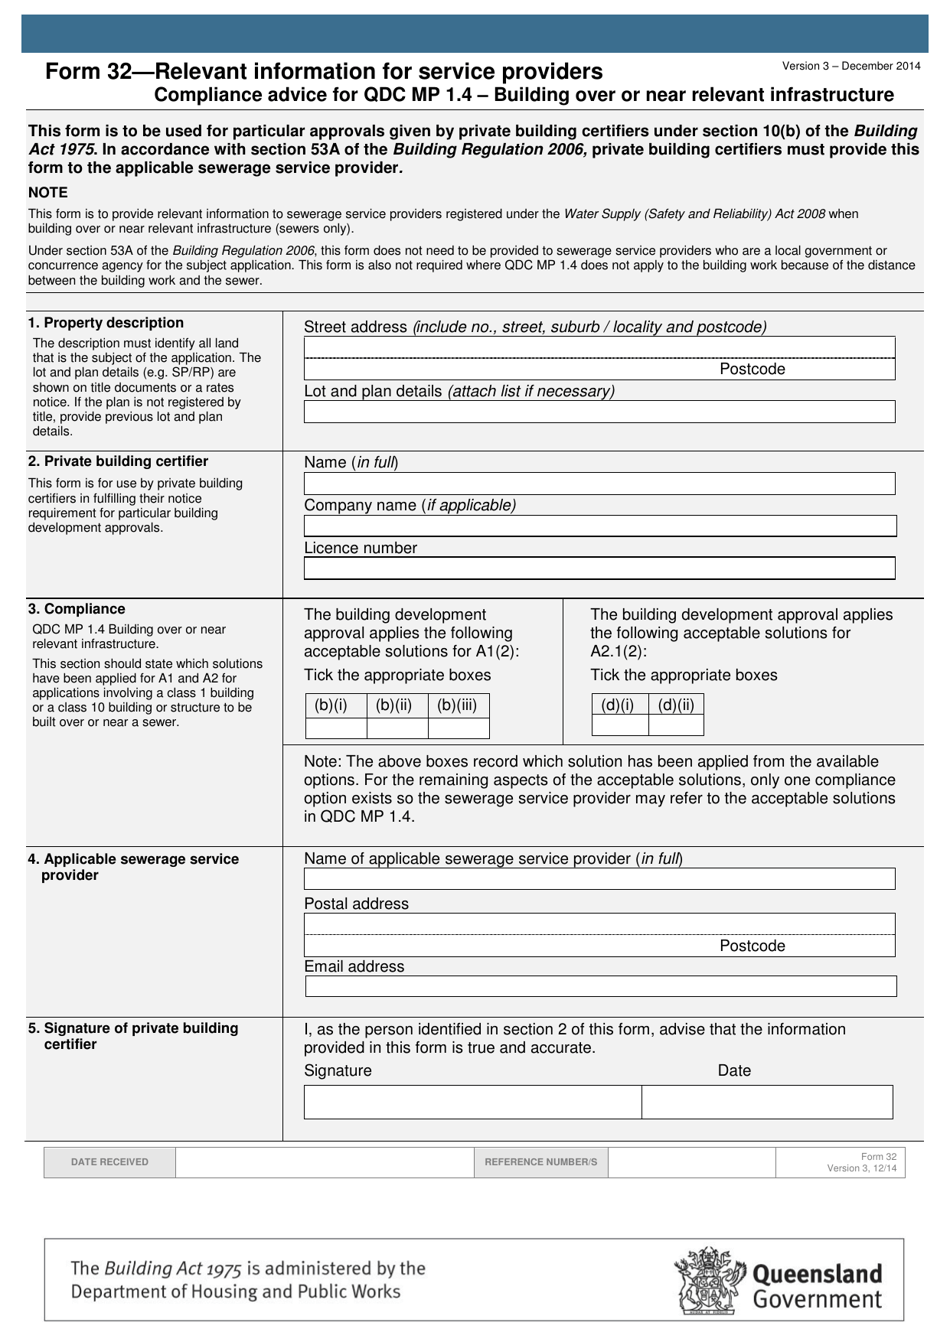 Form 32 Relevant Information for Service Providers - Queensland, Australia, Page 1